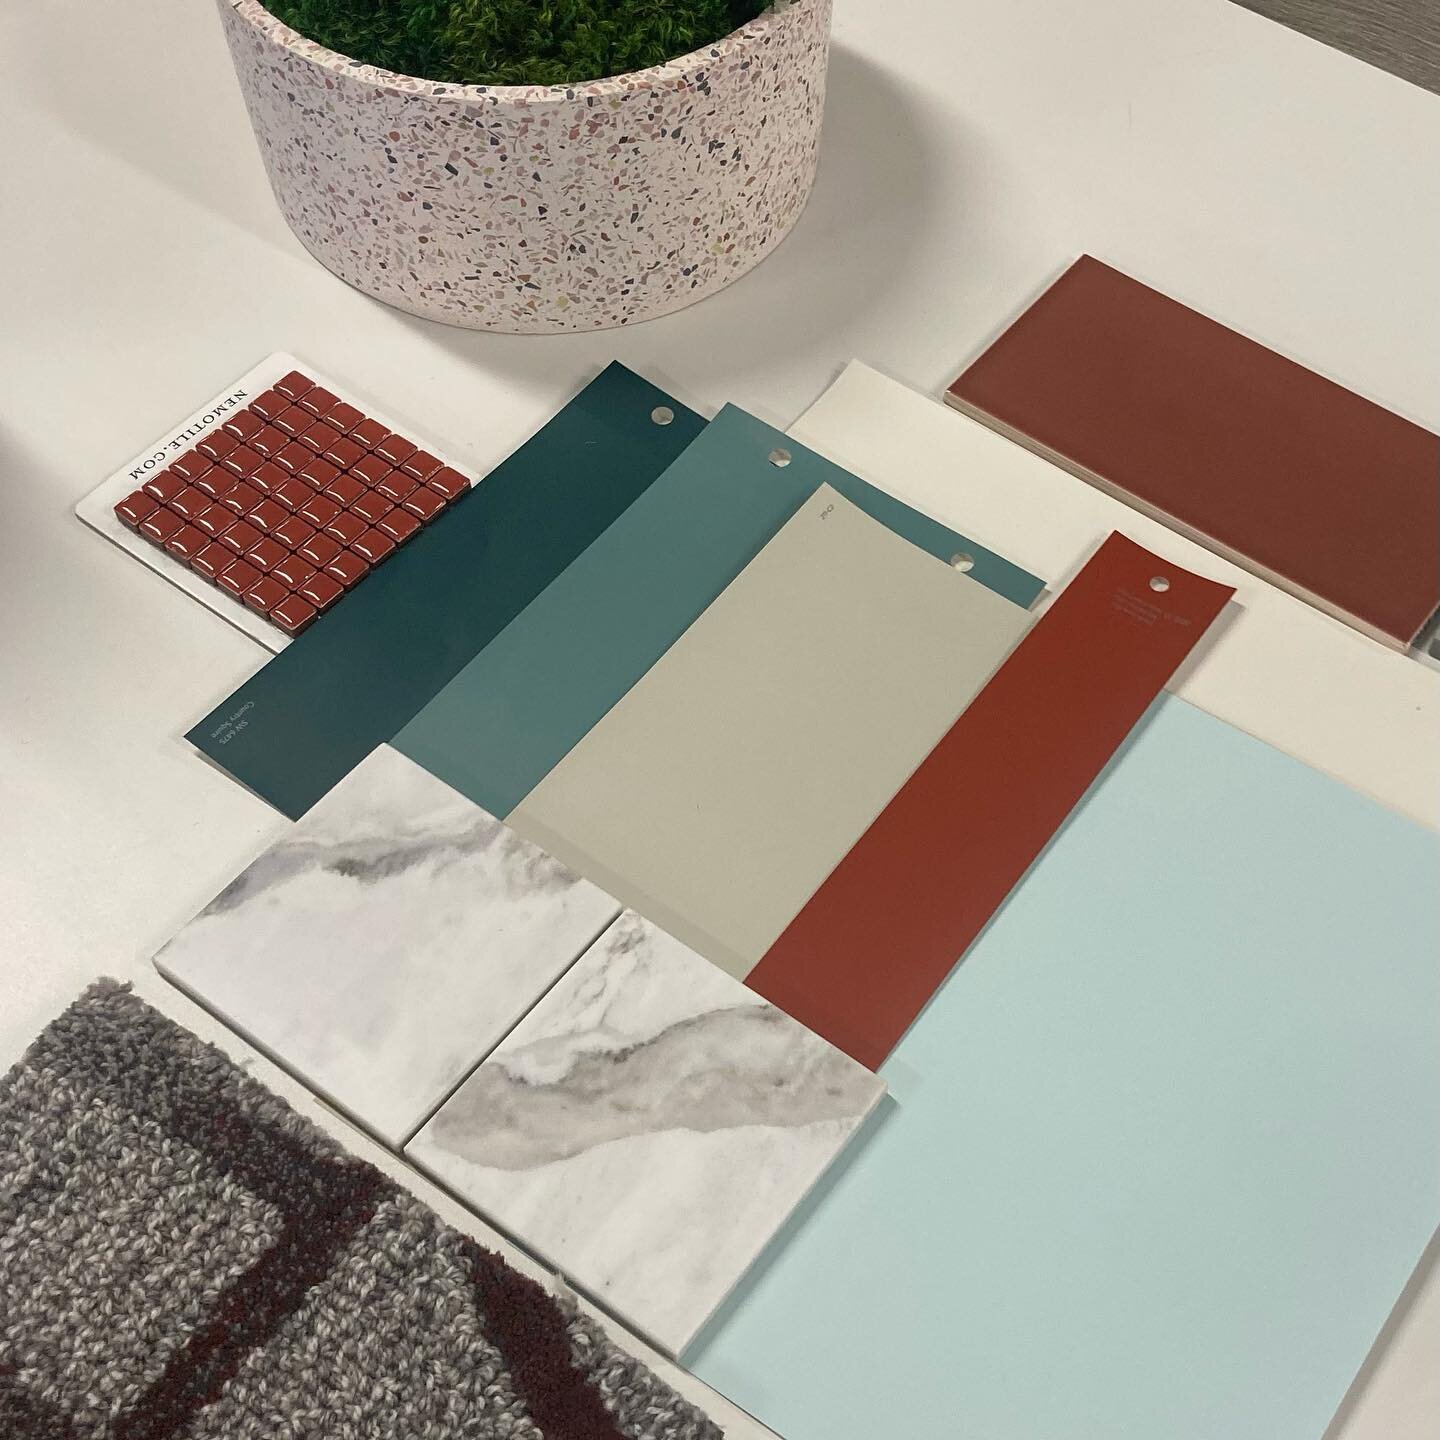 We love watching our local OAC members at work. Sneak peak of a current project by @becca.ayon 

#interiorinspiration #materialsamples #materialslibrary #flatlay #sneakpeak #sourcepdx